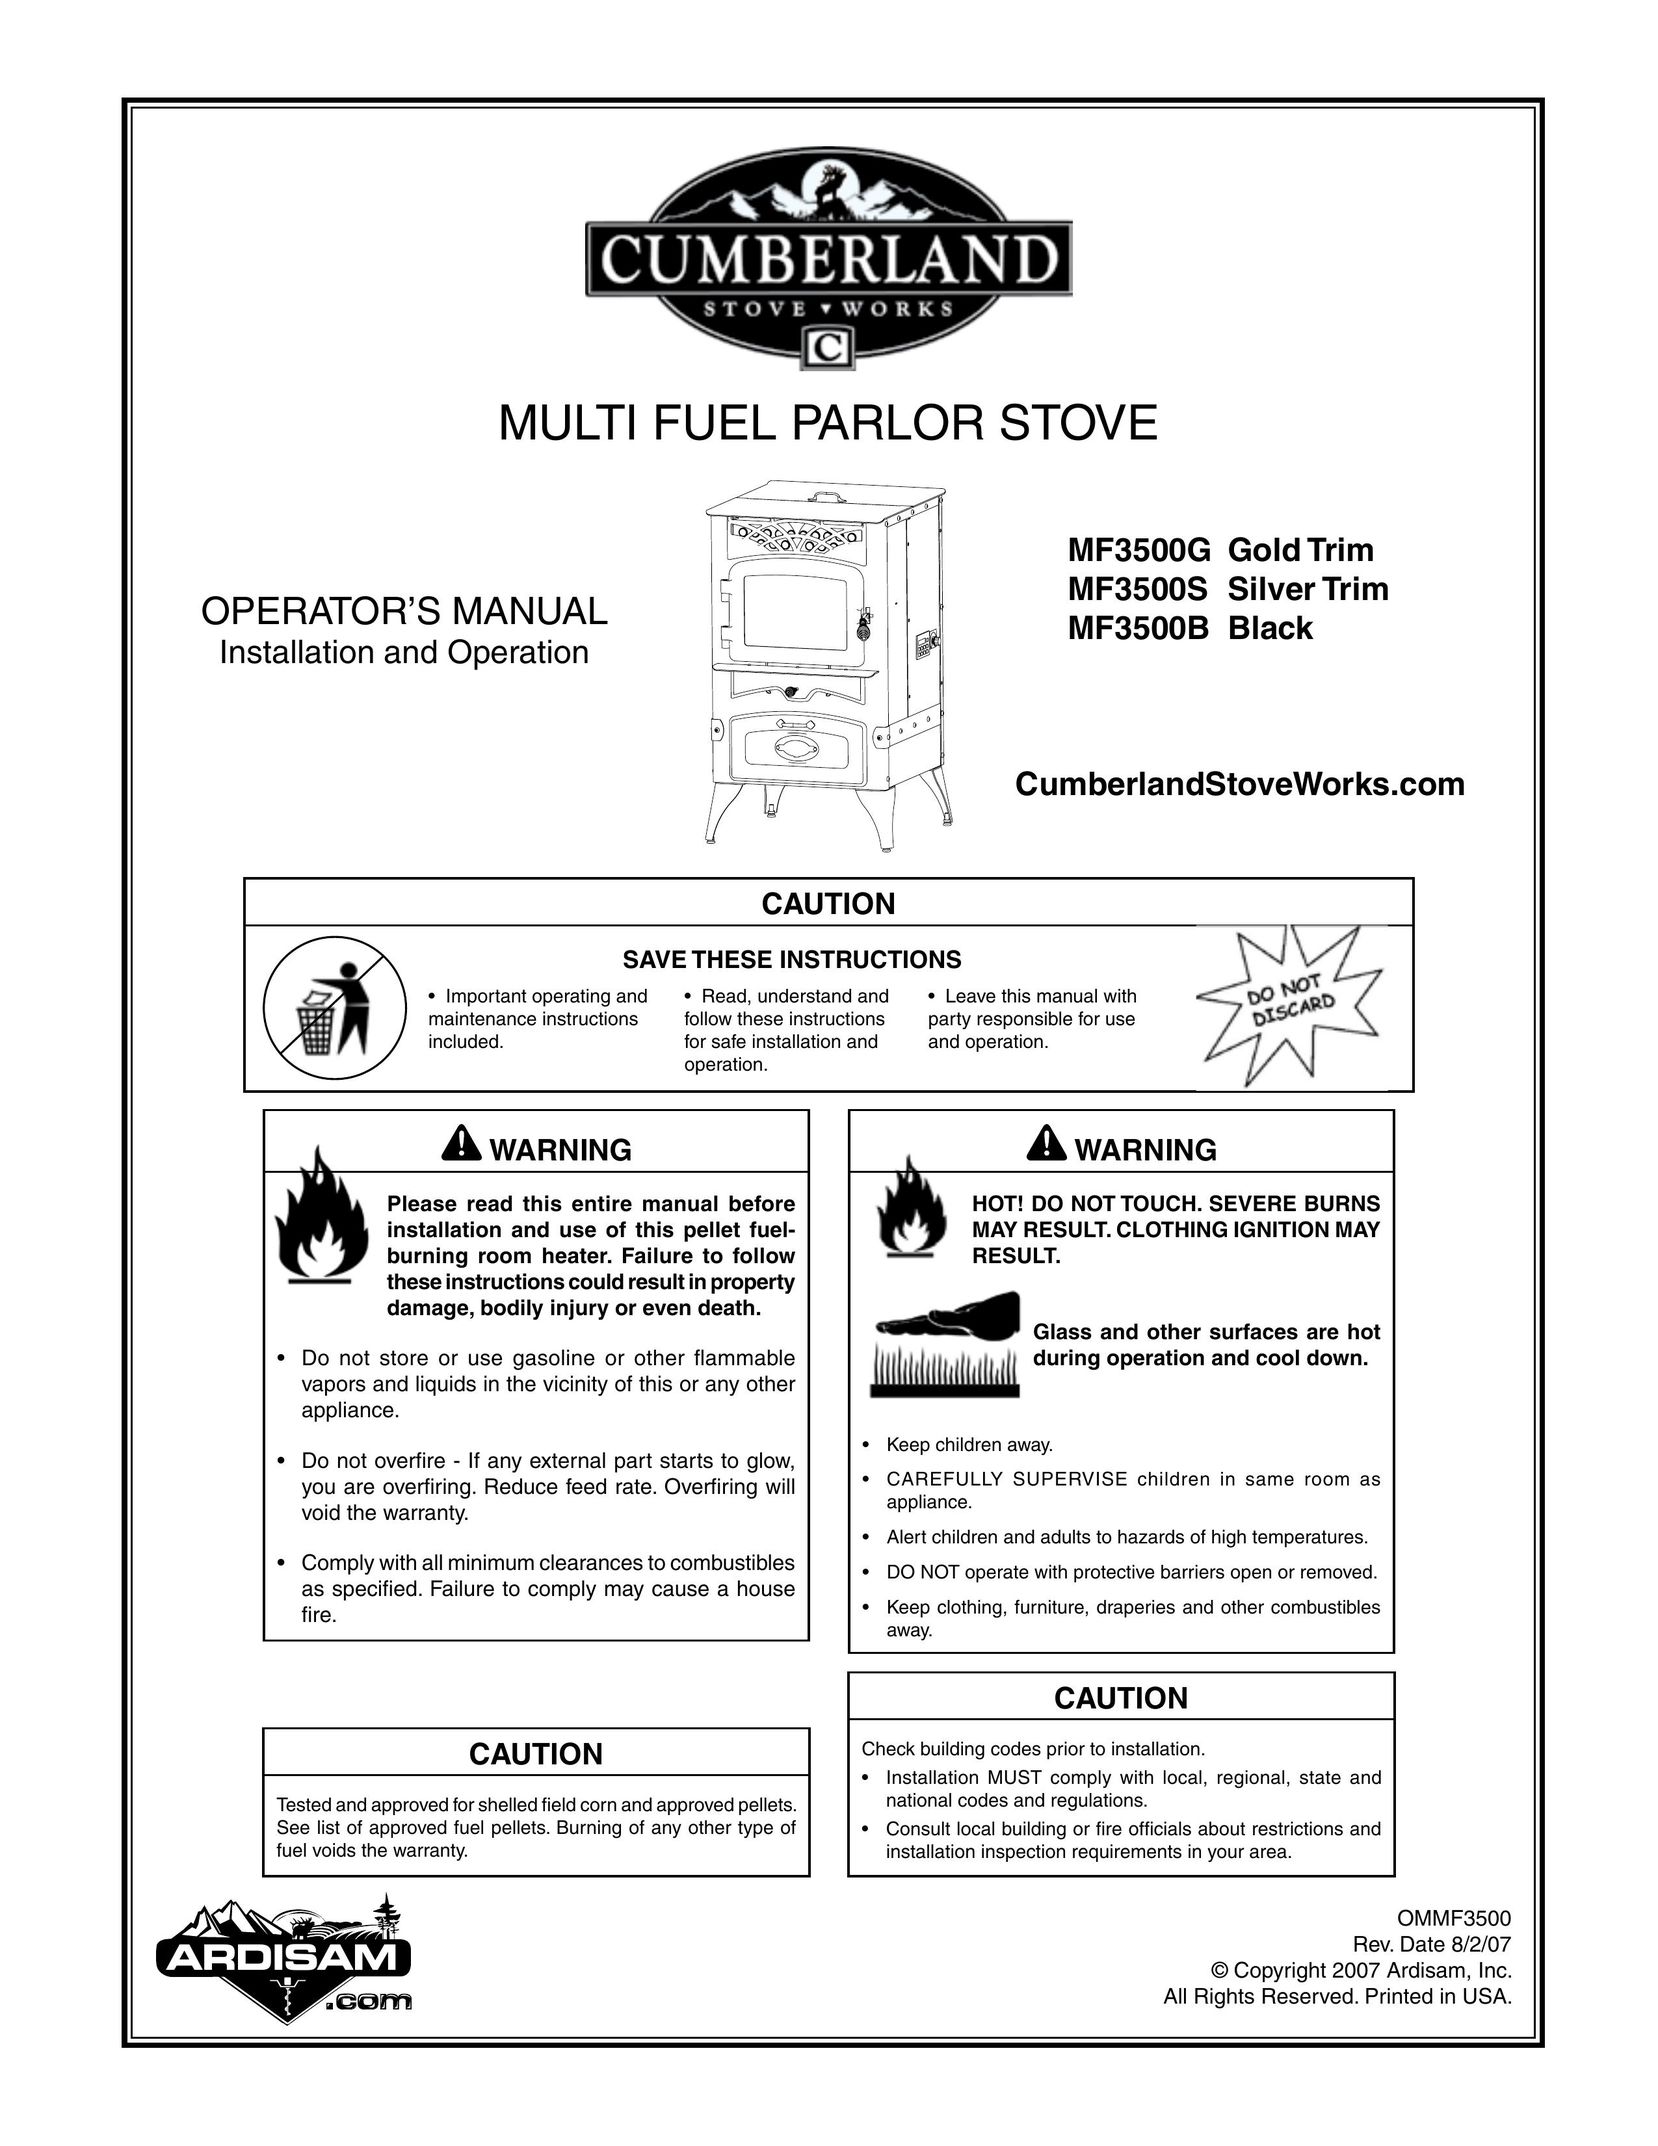 Cumberland Stove Works OMMF3500 Stove User Manual